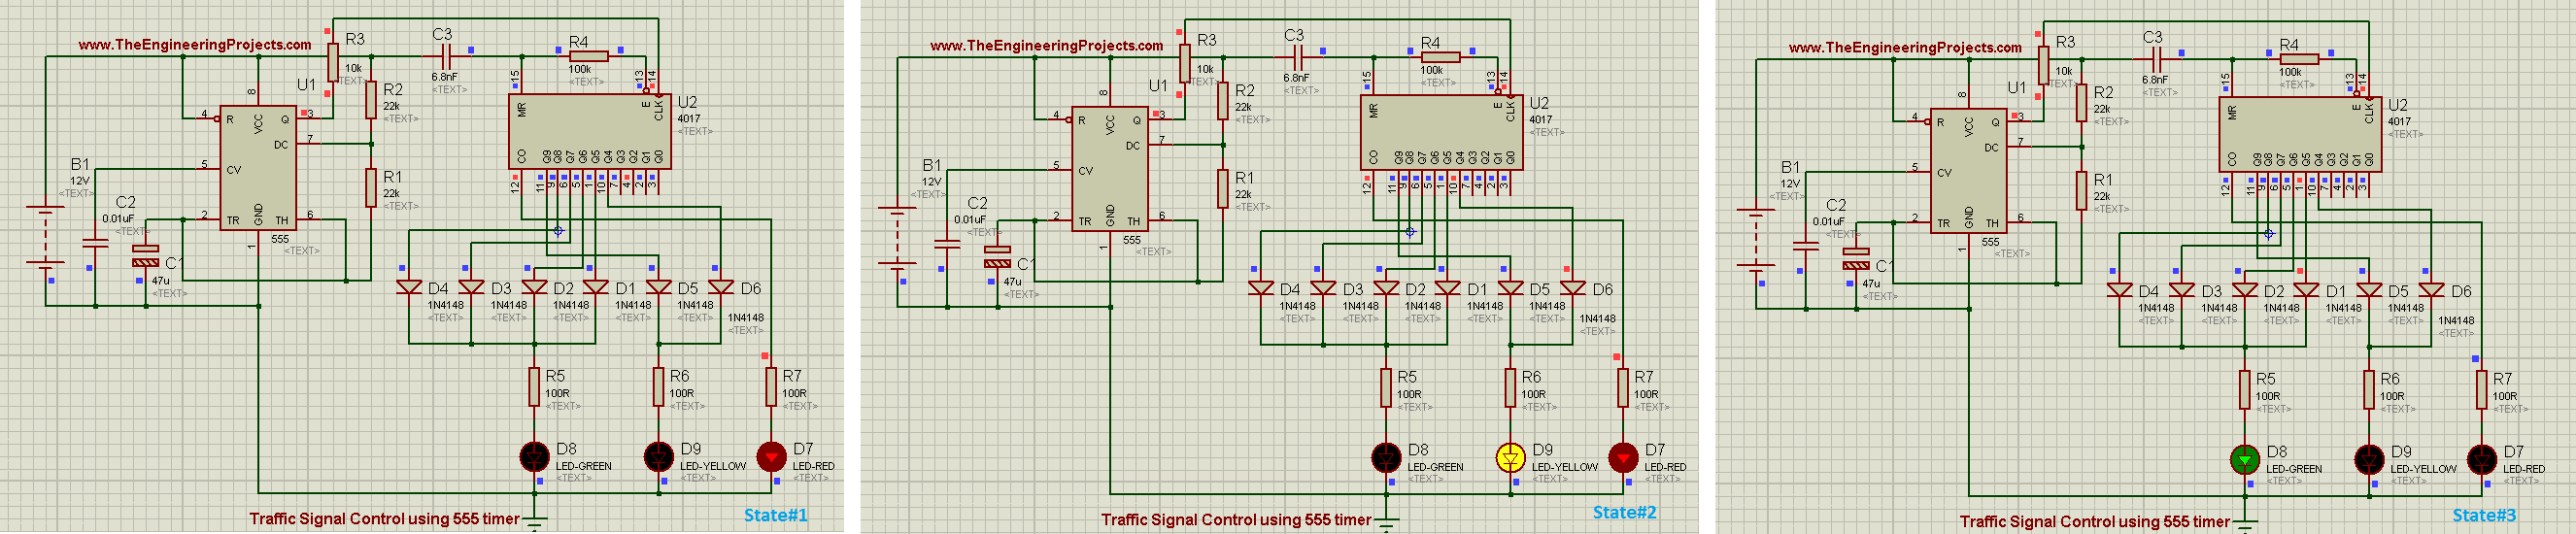 Traffic Signal control in proteus, how traffic signal works, how to design traffic signal control in proteus ISIS